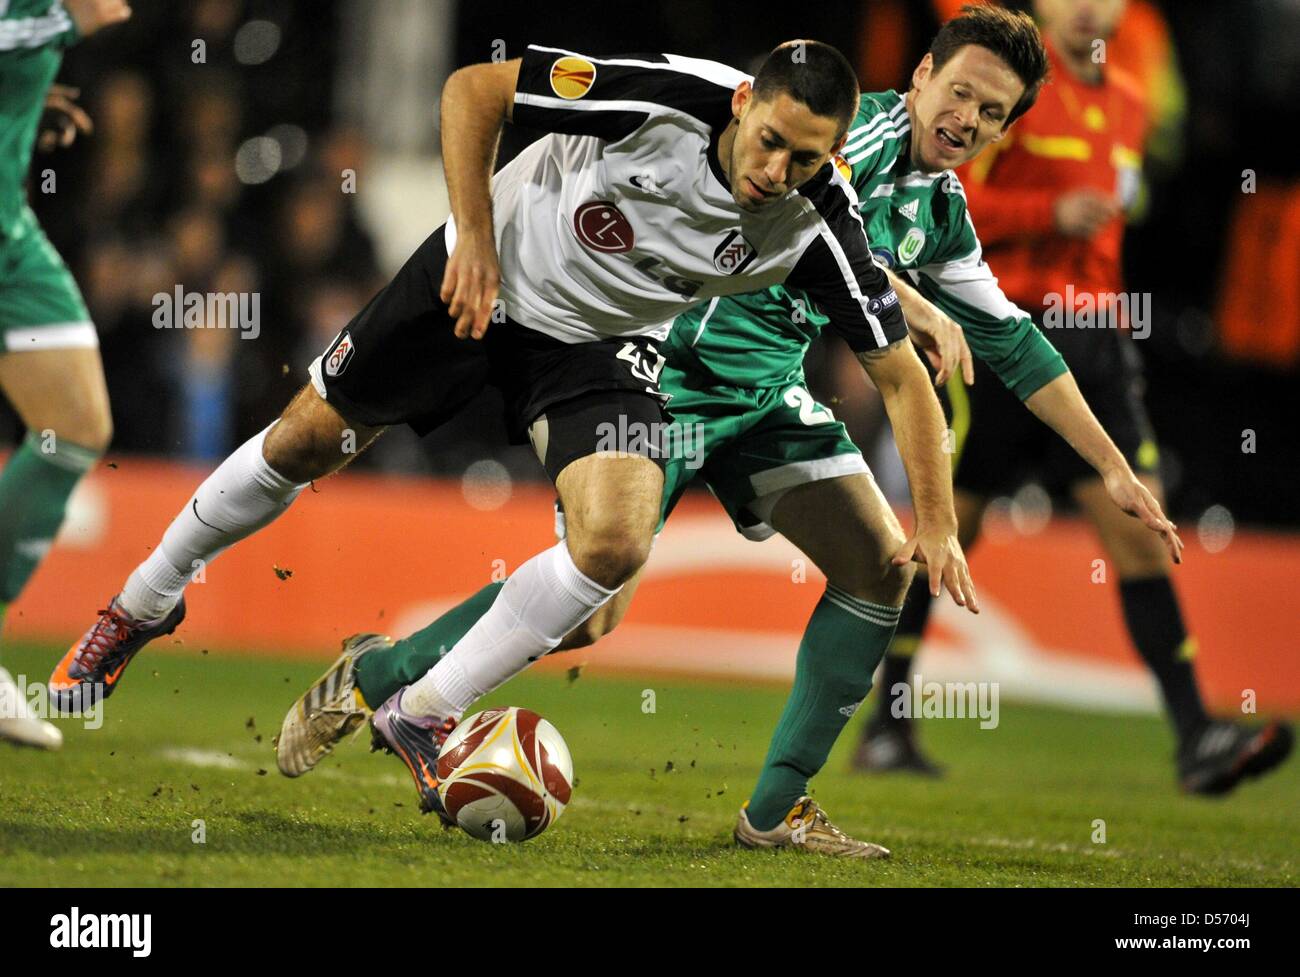 Fulham's Clint Dempsey (L) and Wolfsburg's Sascha Riether (R) vie for the ball during UEFA Europa League quarter-finals match FC Fulham vs VfL Wolfsburg at Craven Cottage stadium in London, Great Britain, 01 April 2010. Fulham won the first leg with 2-1. Photo: Jochen Luebke Stock Photo